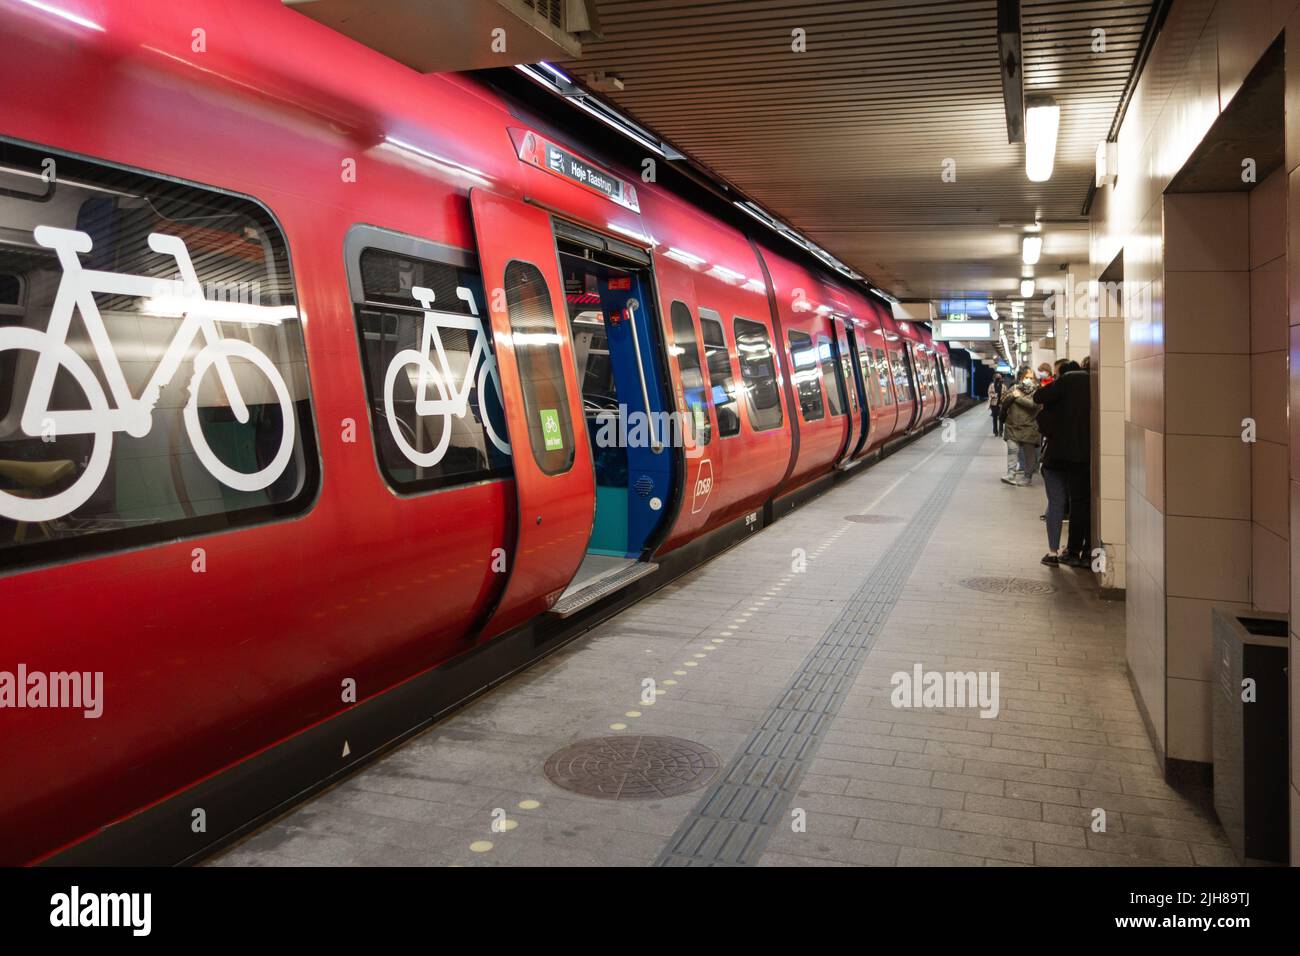 The Copenhagen S-train allow to transport your bicycle for free in the compartment with the bicycle sign on the windows. Stock Photo